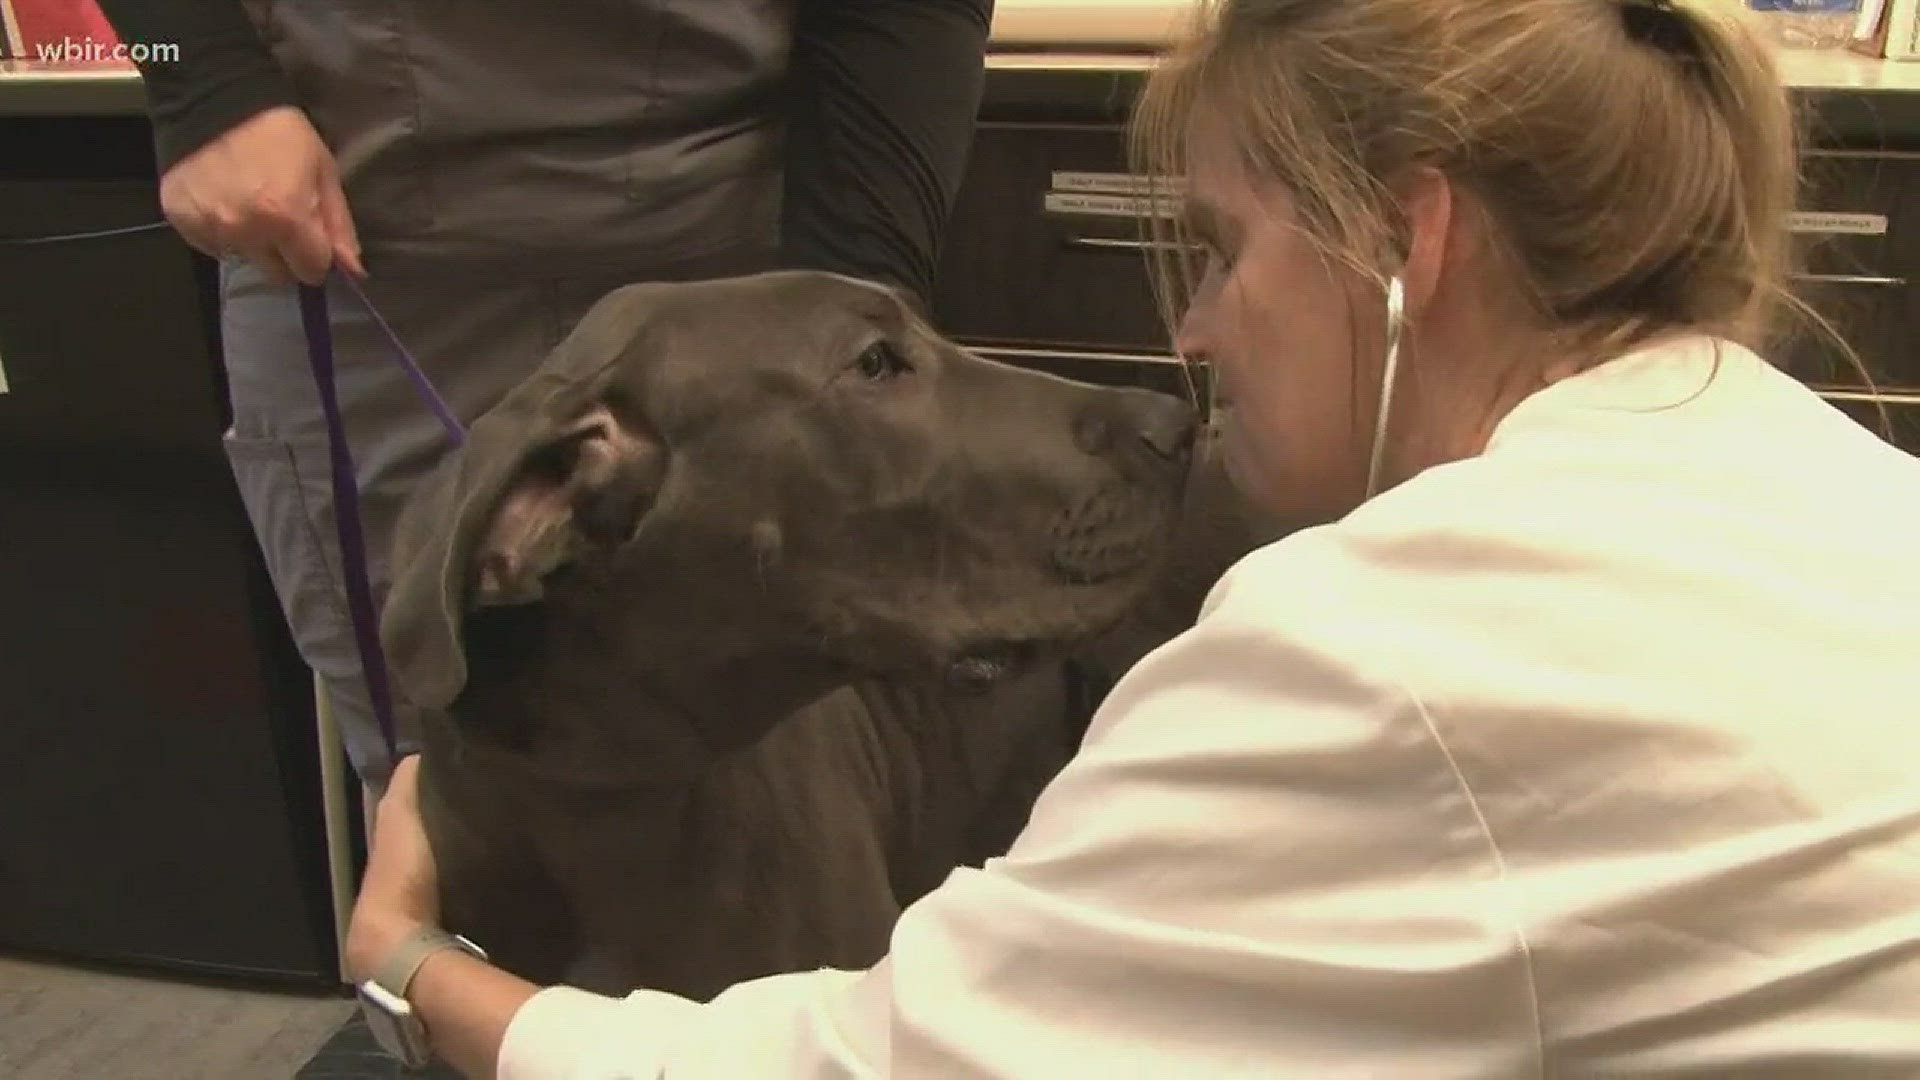 Local vets advise dog owners get a canine flu vaccine if their pet is often around other animals.